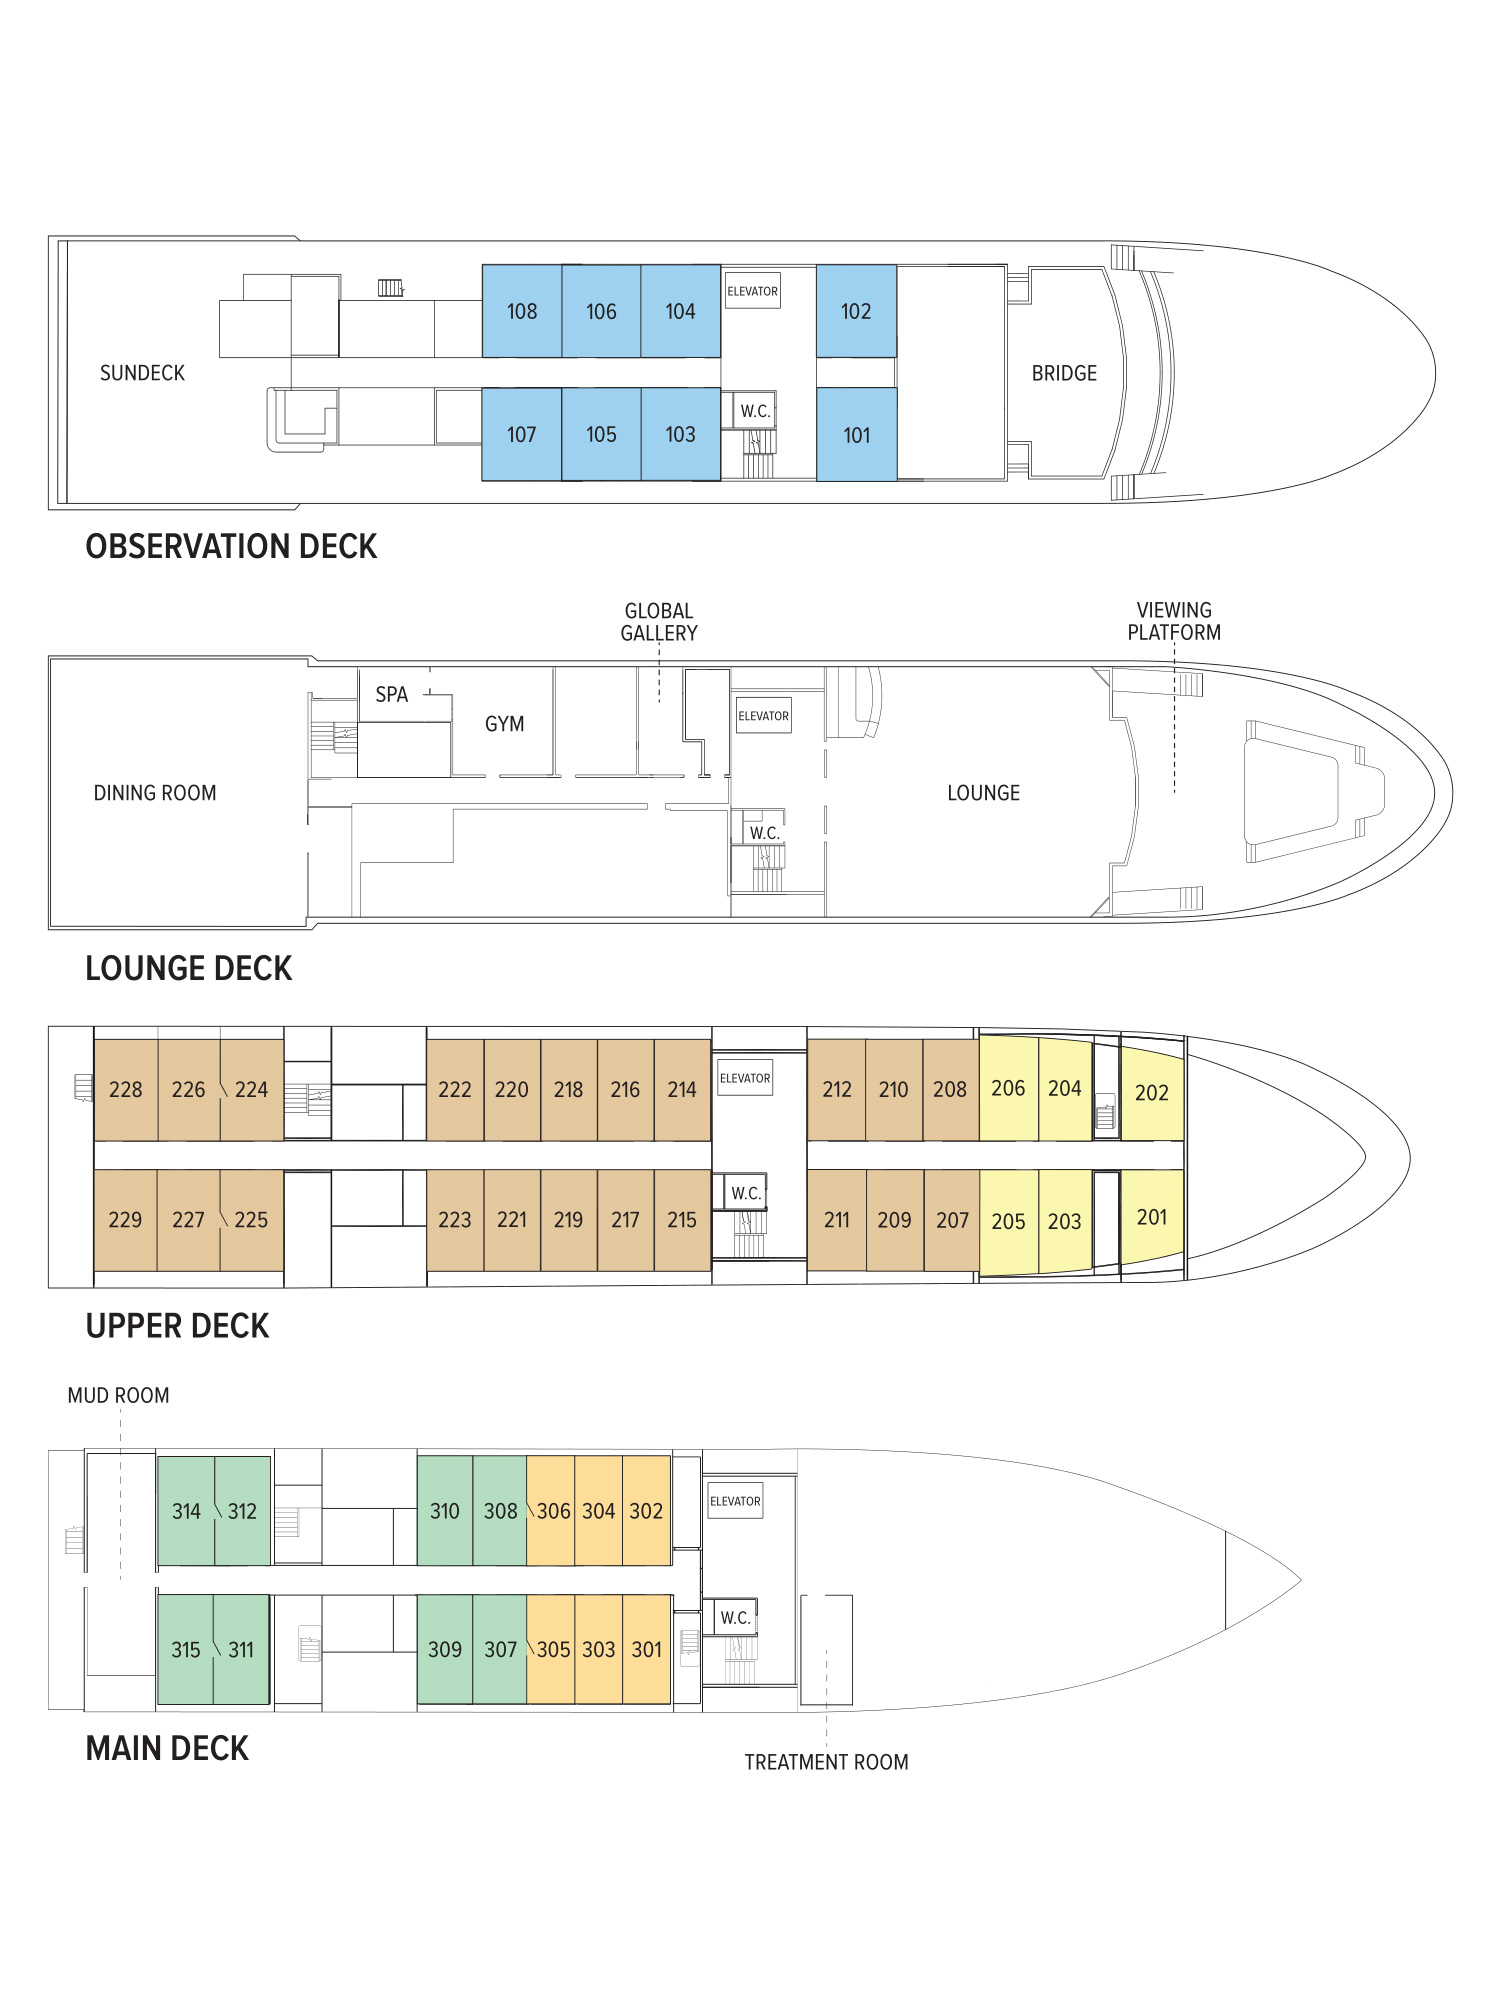 Deck plan detailing Main Deck, Upper Deck, Lounge Deck, and Observation Deck of National Geographic Venture & Nat Geo Quest expedition ships